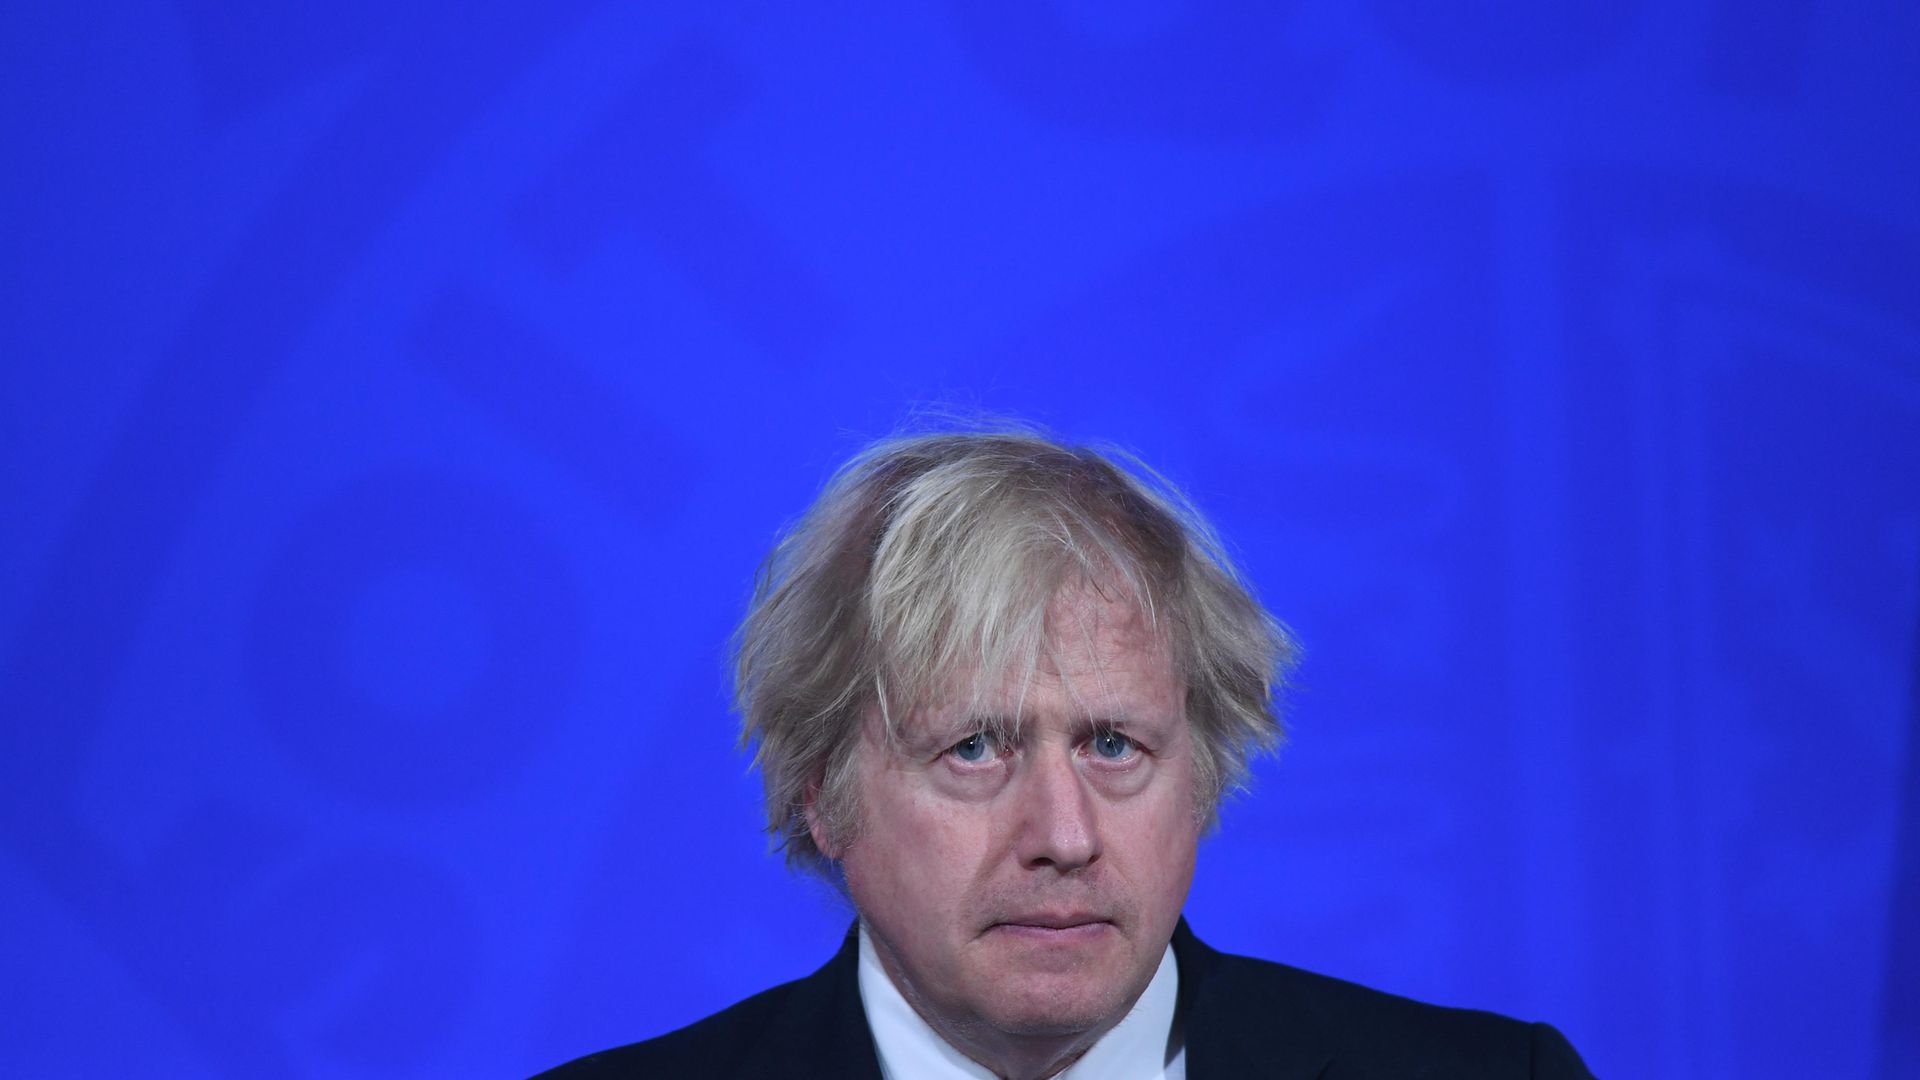 Prime minister Boris Johnson, during a media briefing in Downing Street, London, on coronavirus (Covid-19) - Credit: PA